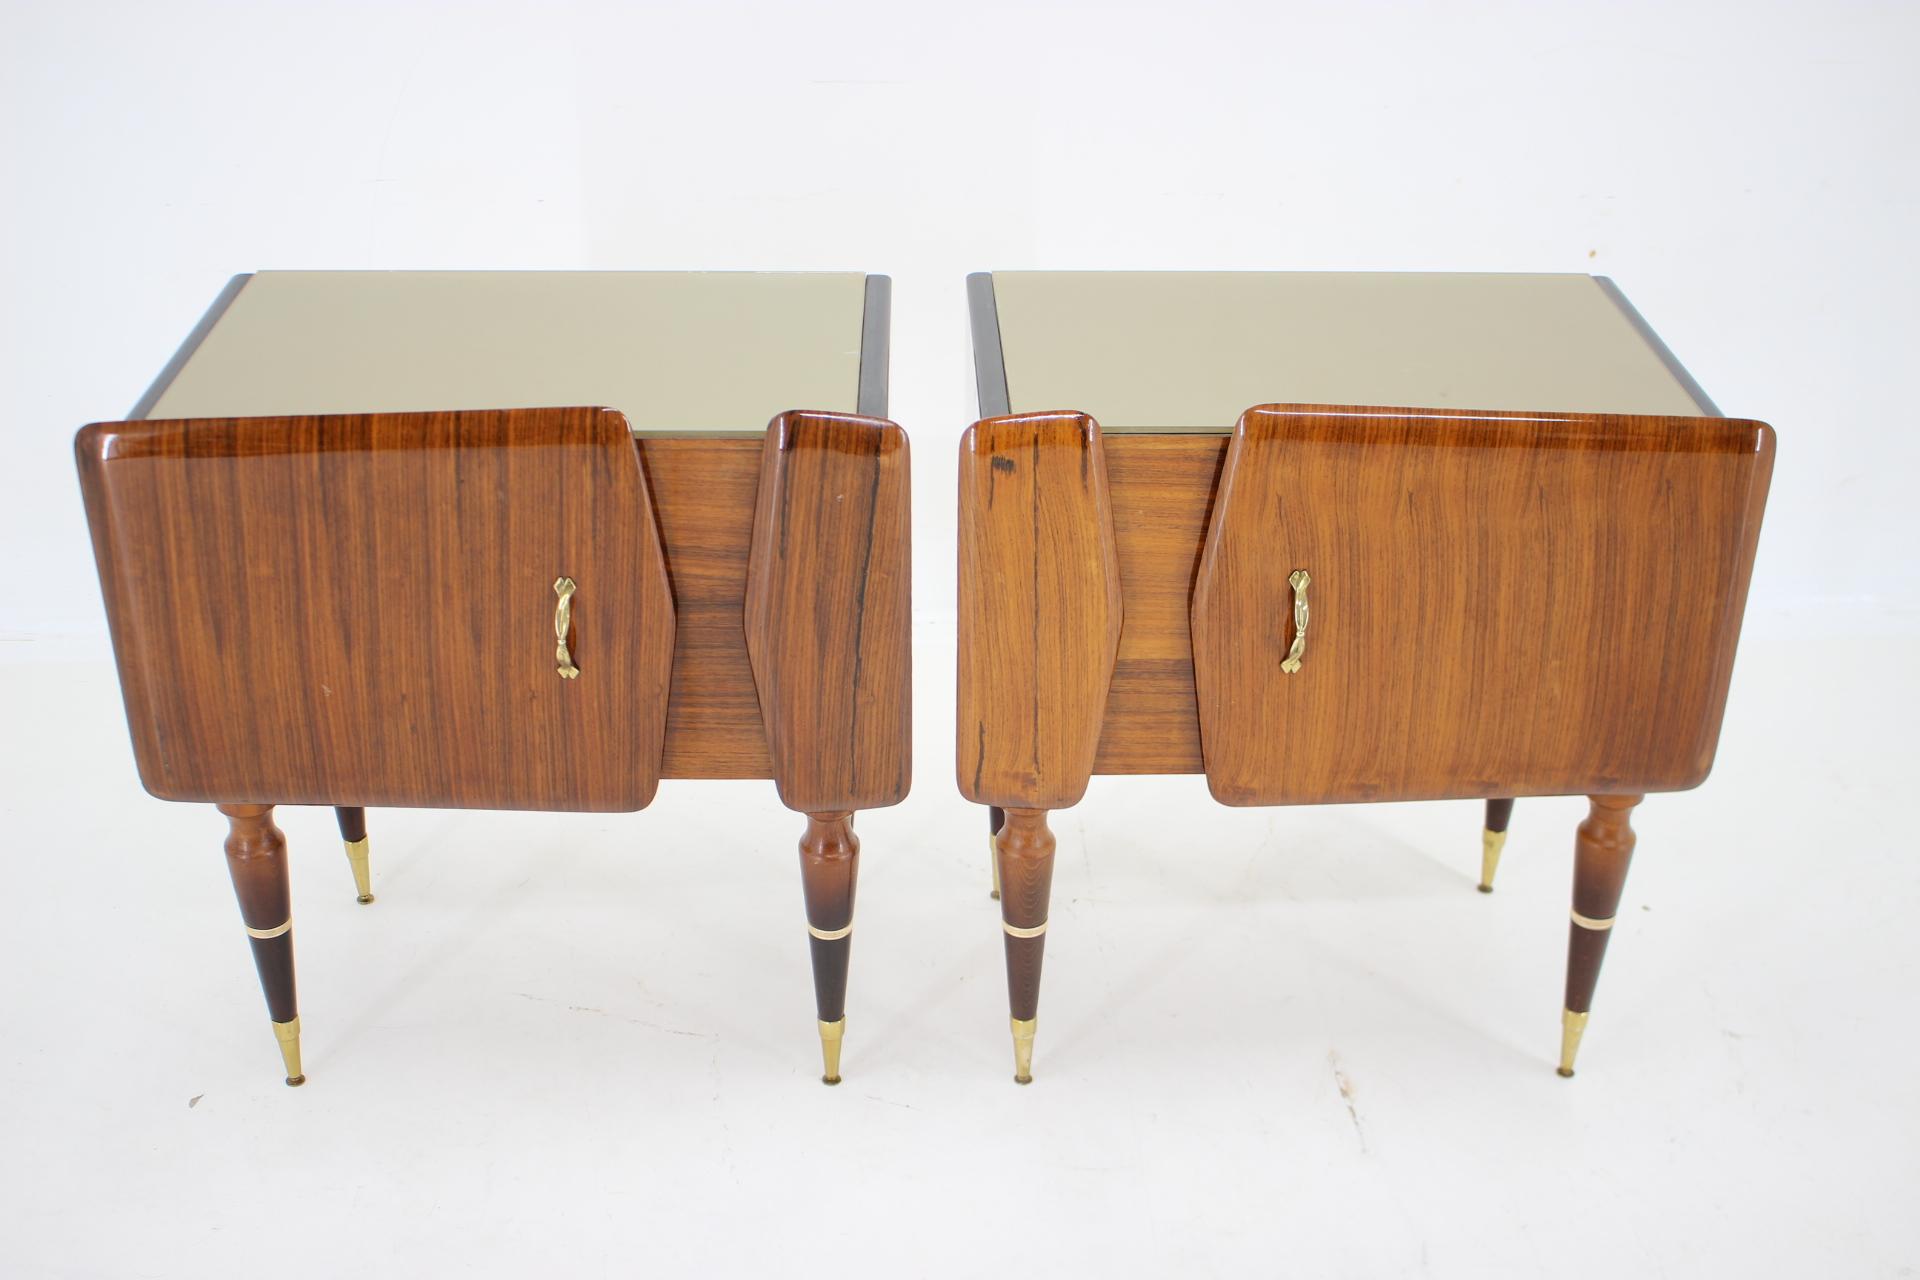 1960s Pair of Sculptural Wooden Bedside Tables, Italy For Sale 4